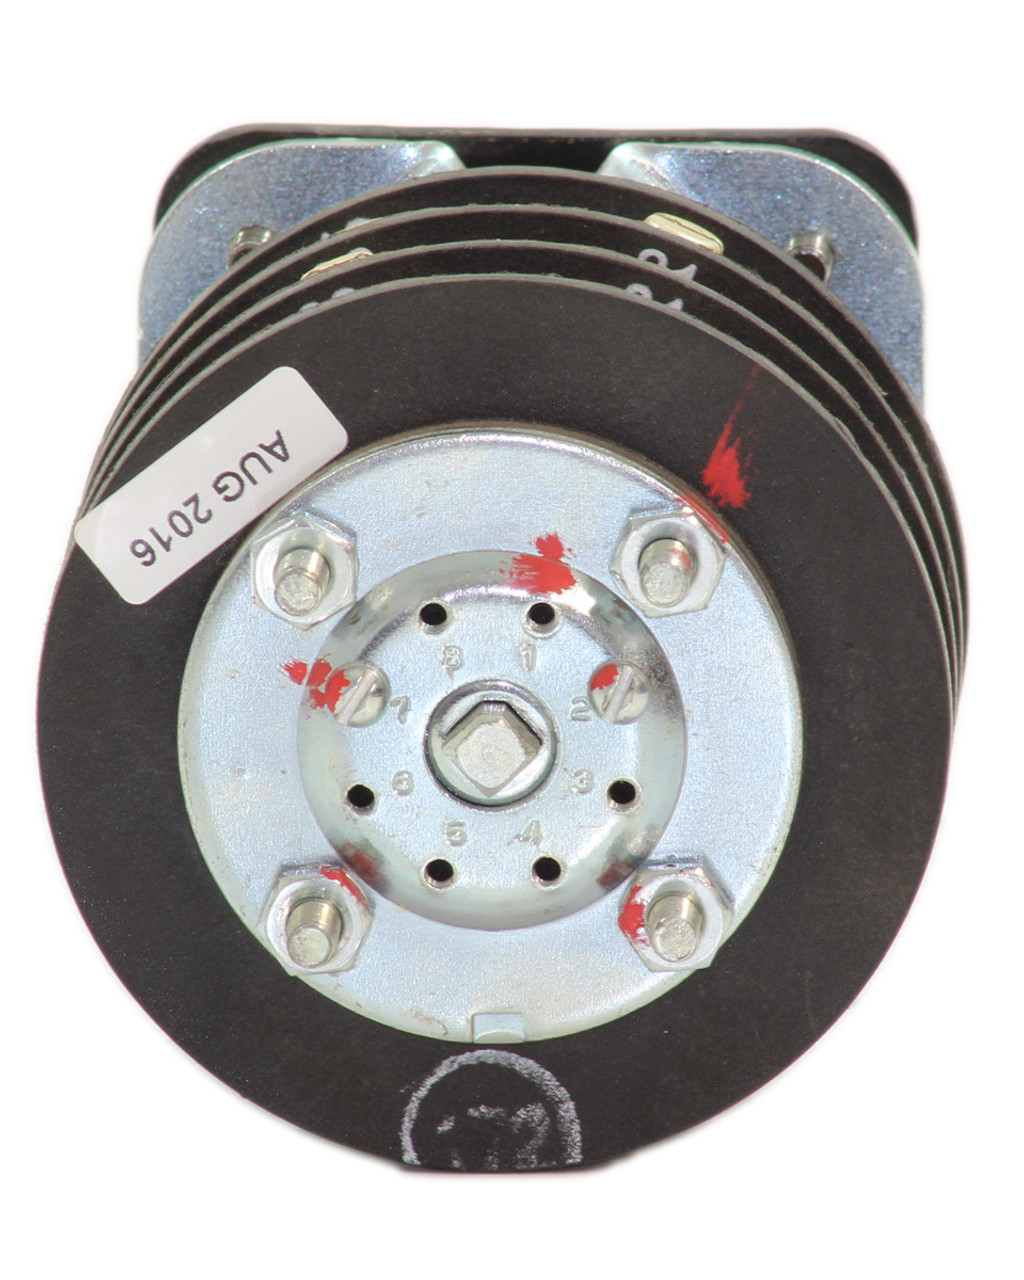 General Electric 9524203B Mode Switch Series 95 Selector